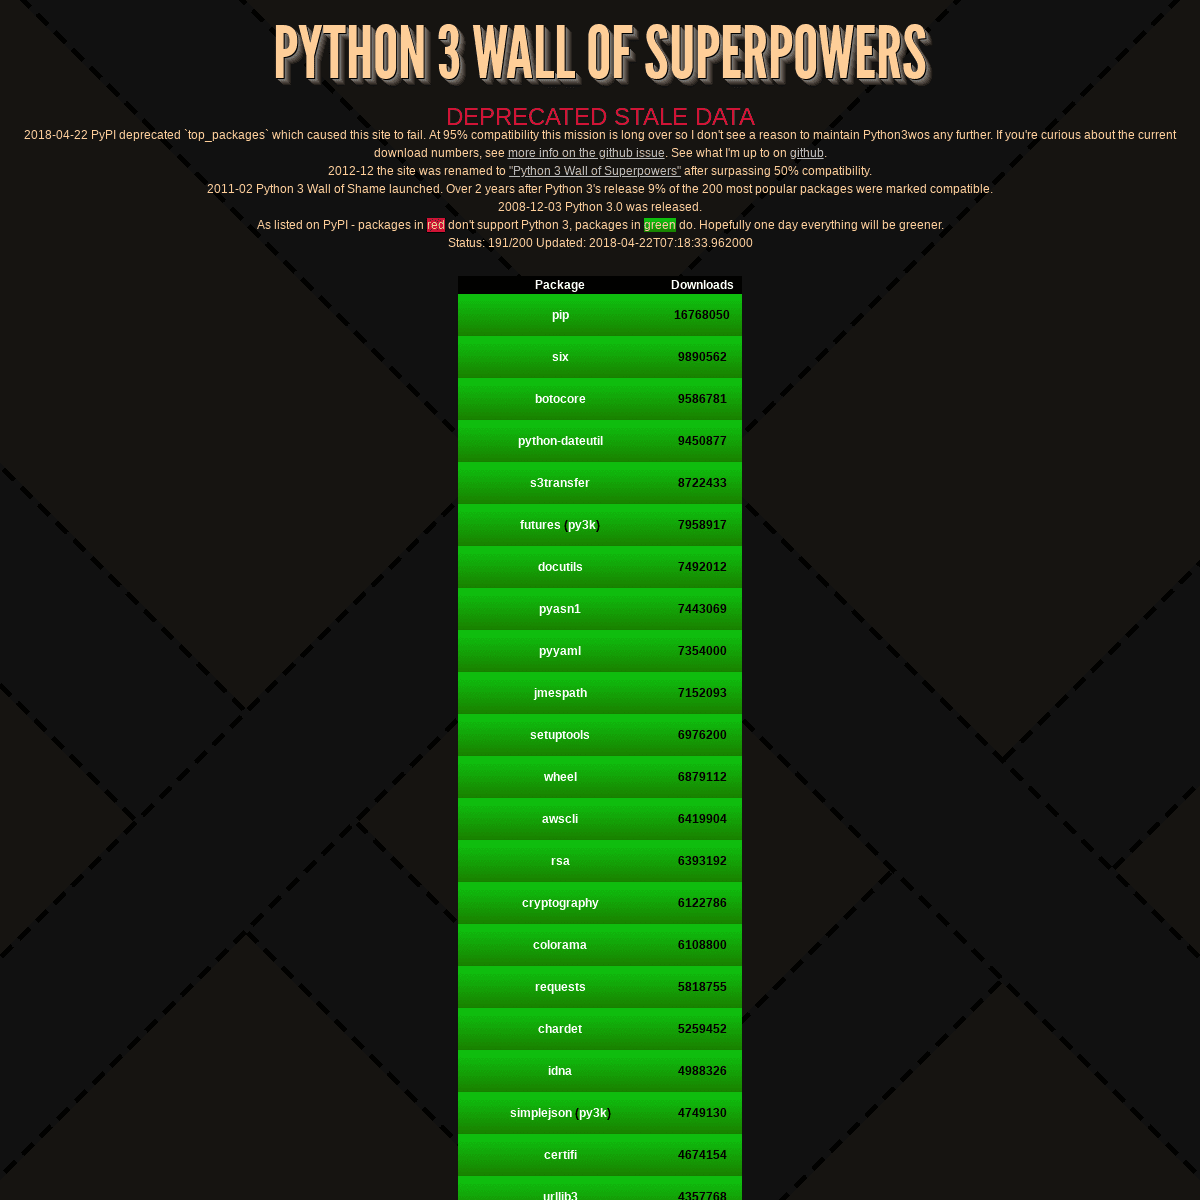 Python 3 Wall of Superpowers